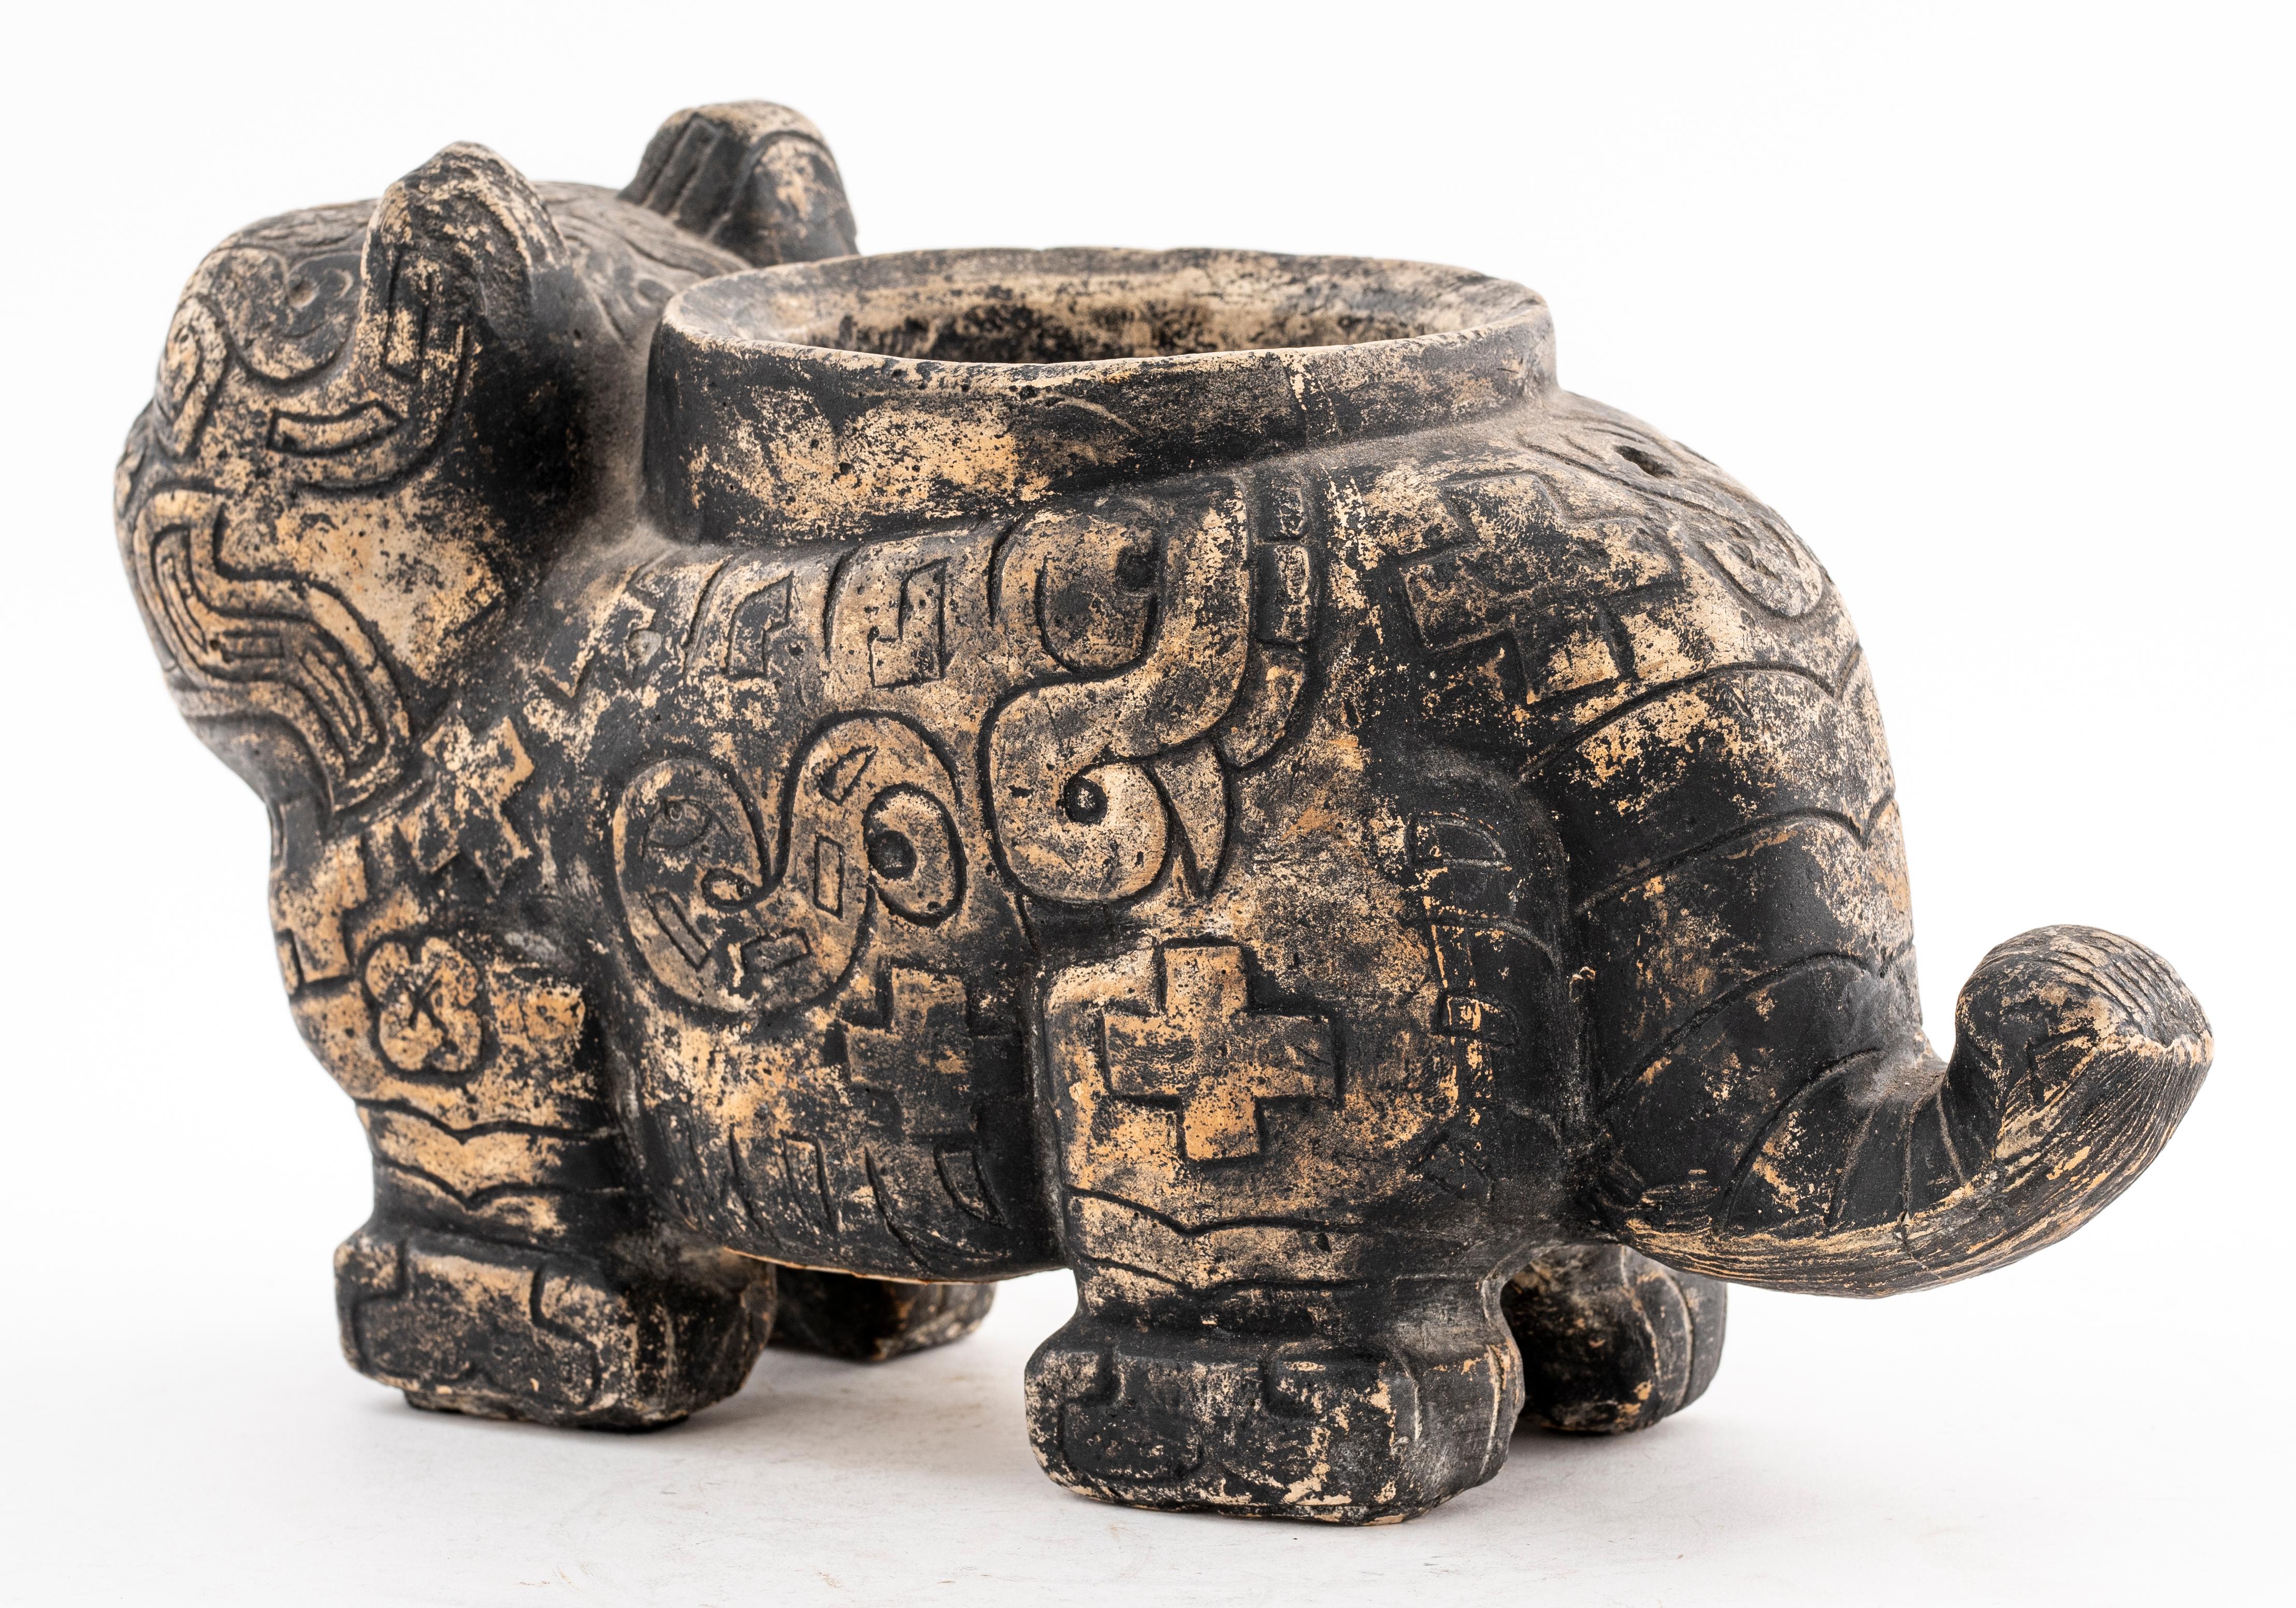 Reproduction of a South American jaguar effigy vessel from the Chavin culture in plaster. This vessel is based upon the original, found in Penn Museum, Philedelphia, PA. Provenance: Removed from a 983 Park Avenue estate.

Measures: 7.25